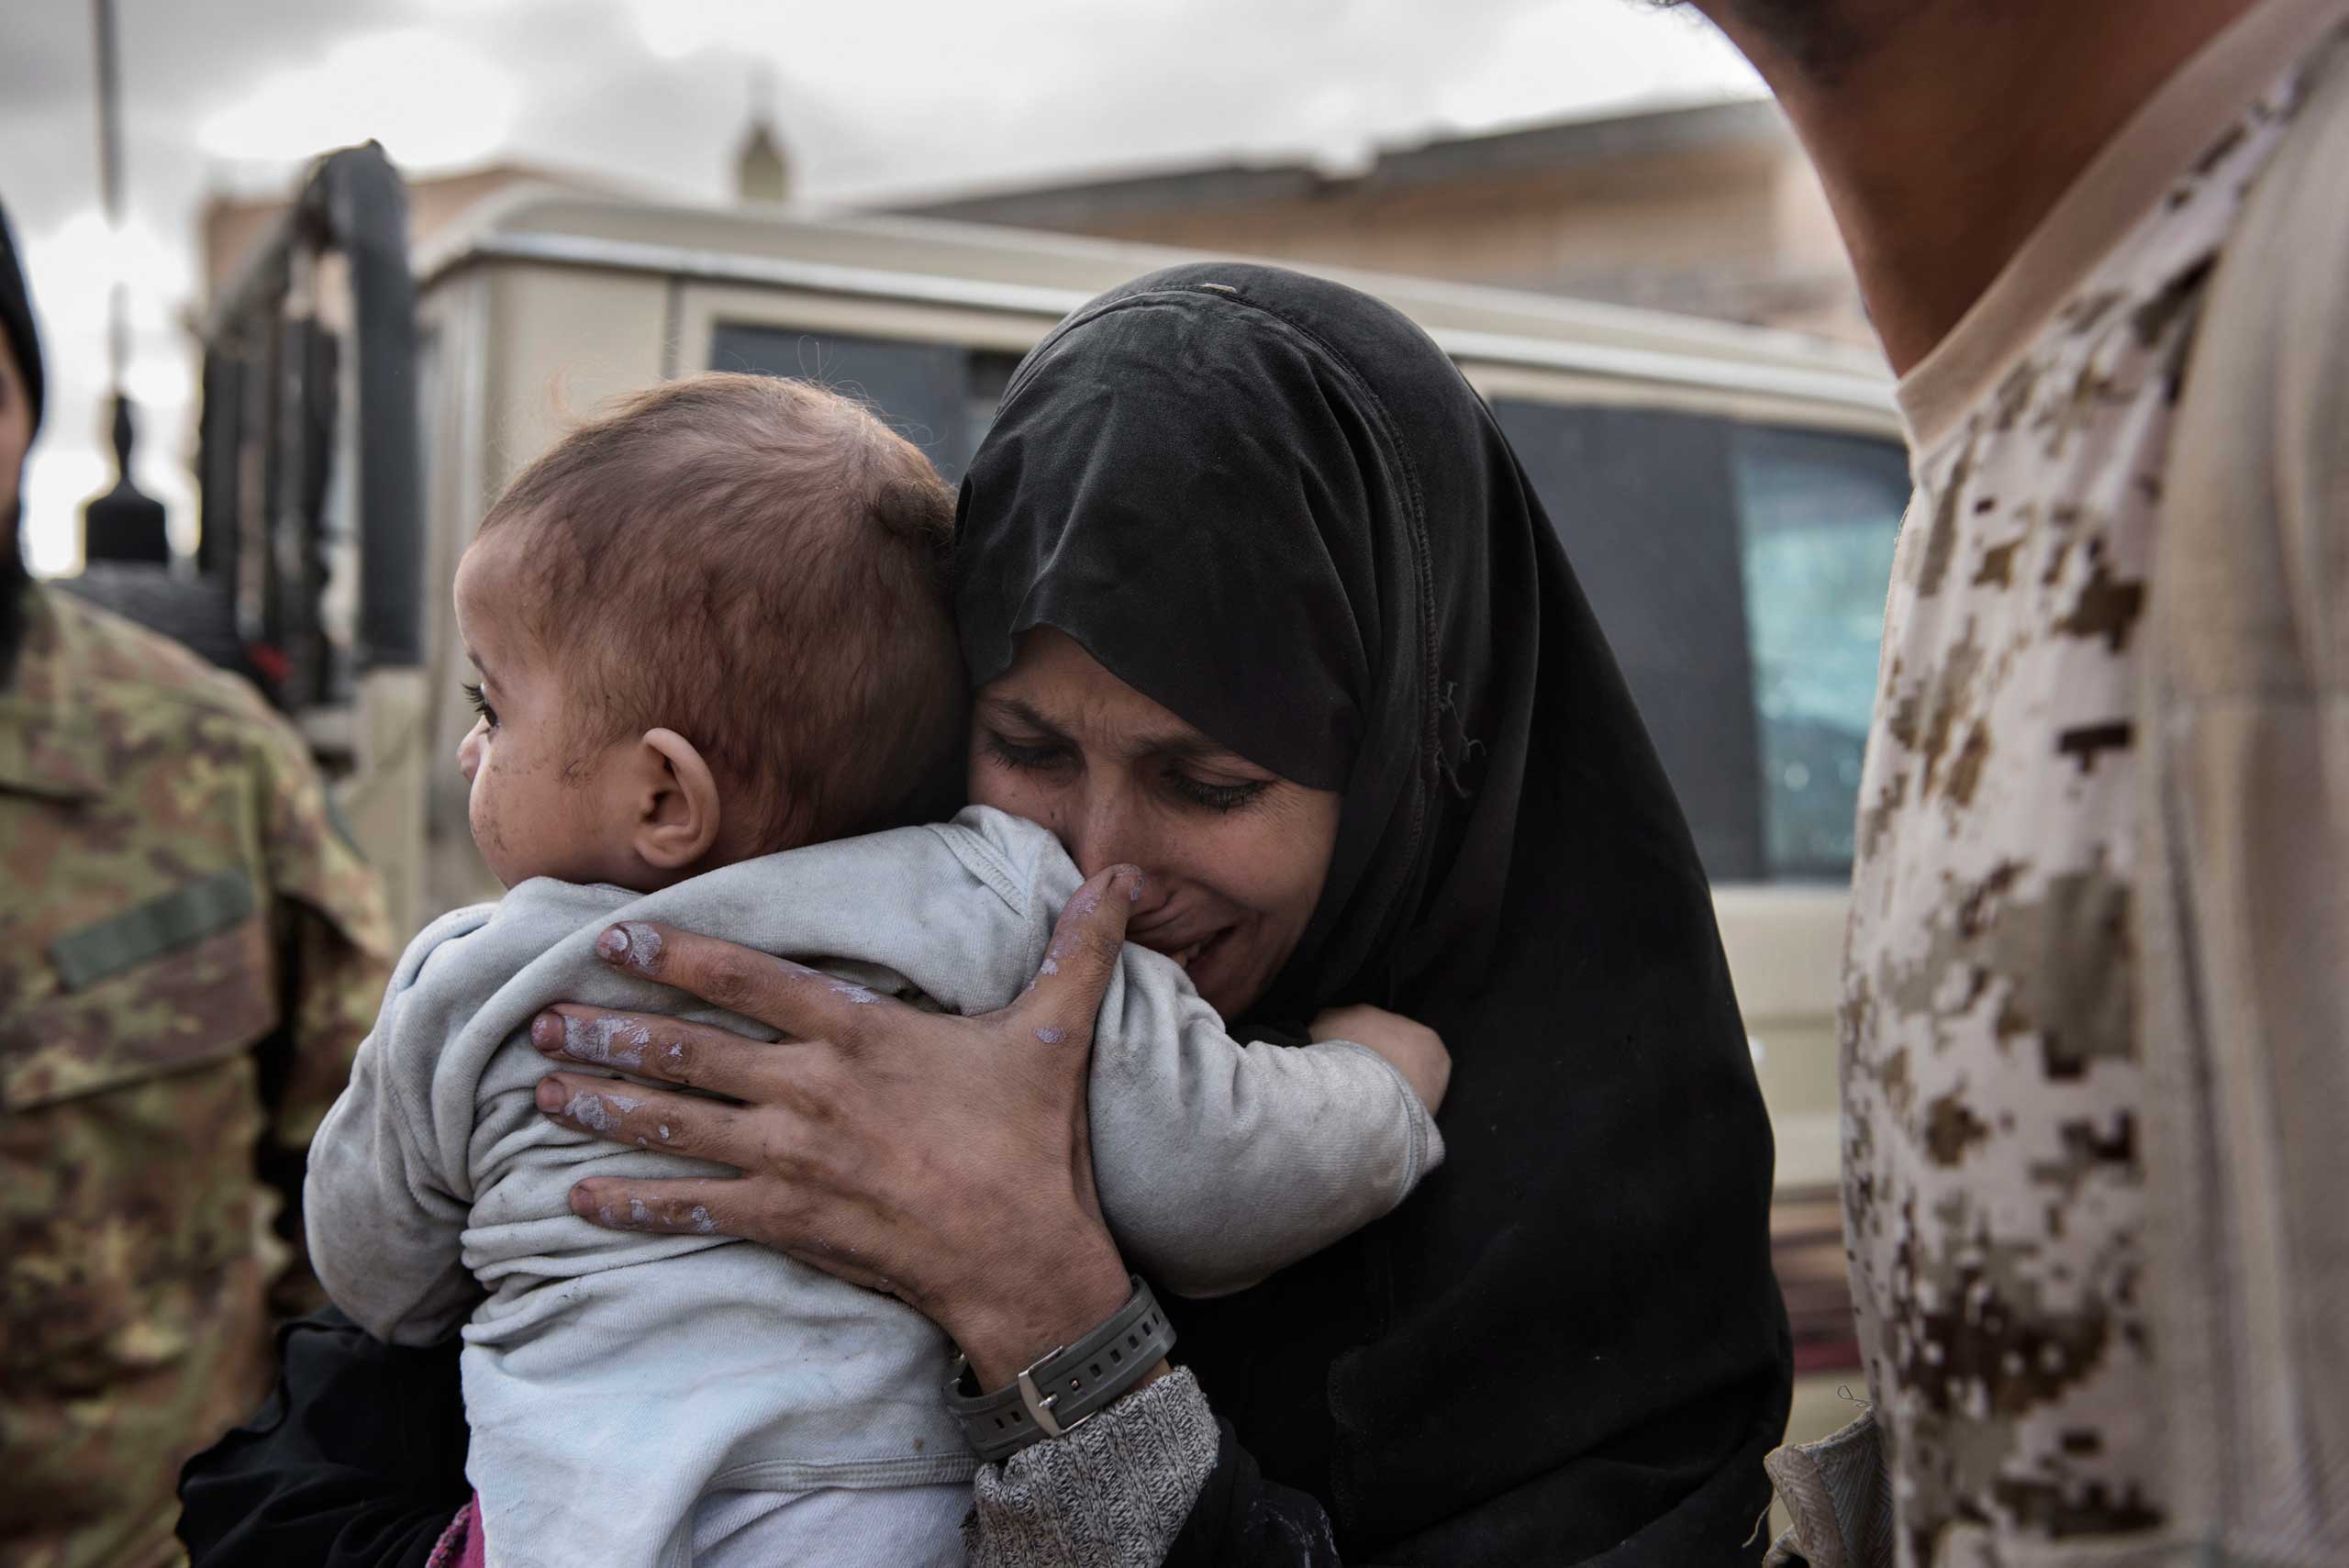 A woman and a child, allegedly IS family members, are seen after fighters of the Libyan forces affiliated to the Tripoli government took them out of the fighting area in Al Jiza neighbourhood  in Sirte on Dec. 1, 2016.